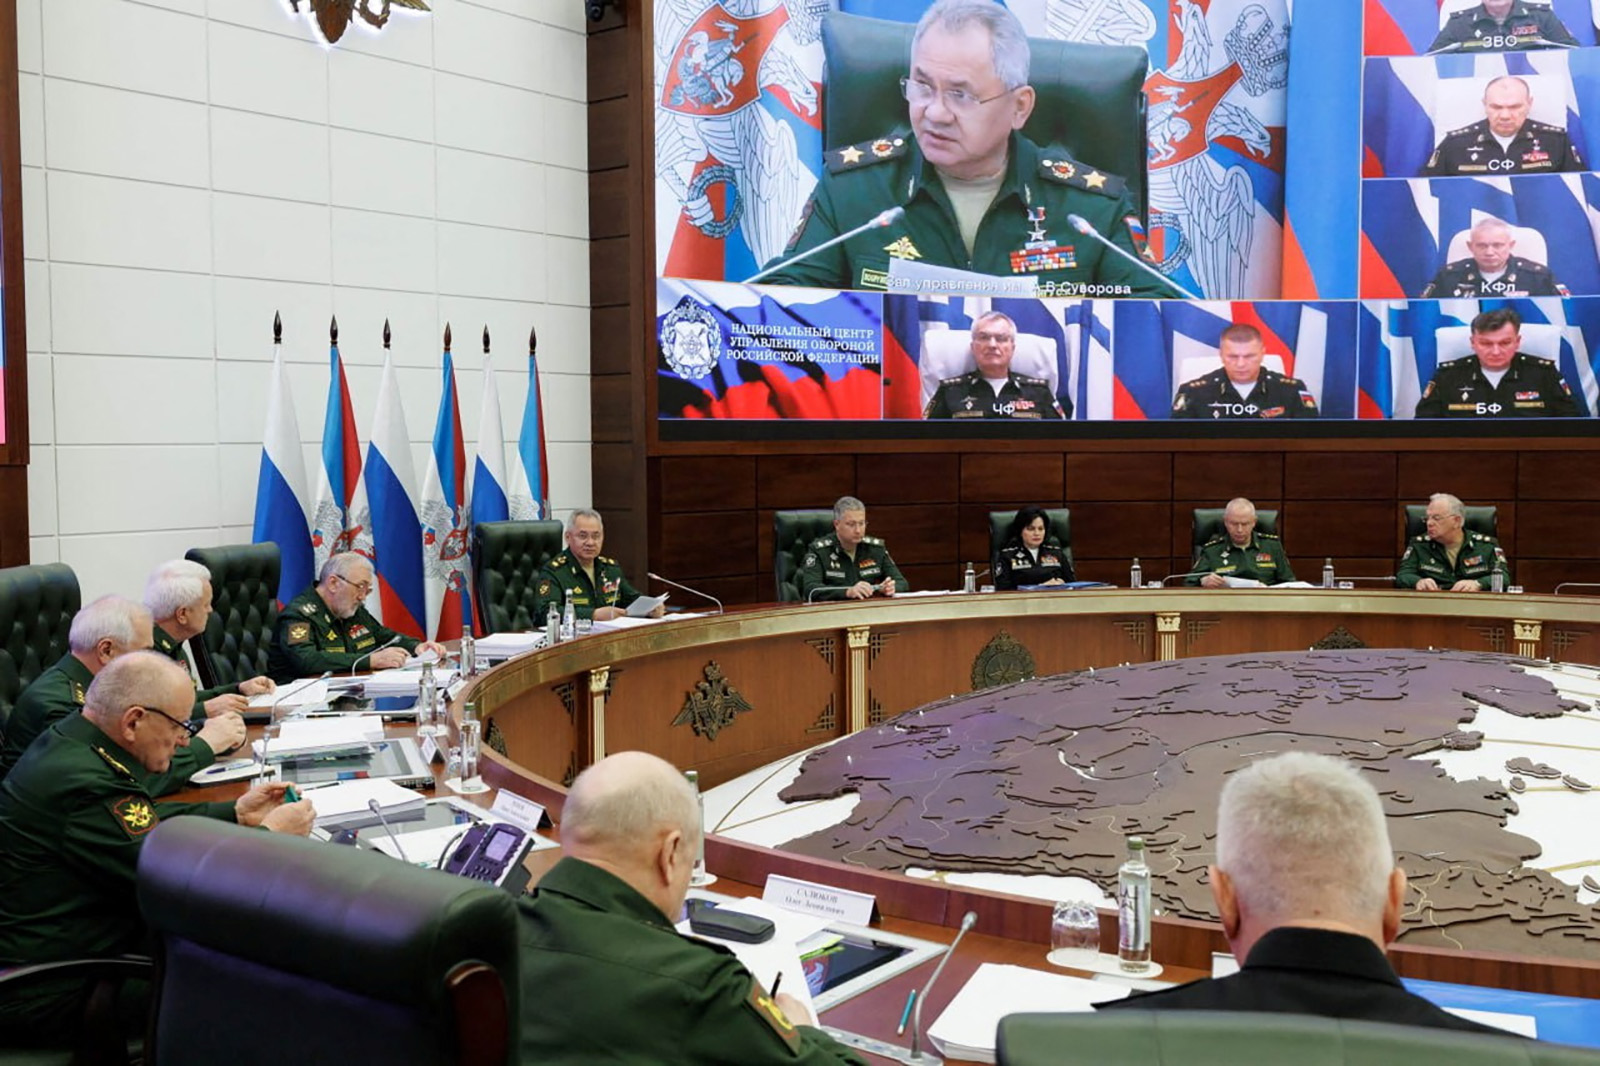 Russian Defence Minister Sergei Shoigu chairs a meeting with the leadership of the Armed Forces, Admiral Viktor Sokolov is bottom left on screen, in Moscow, Russia, in this picture released September 26.